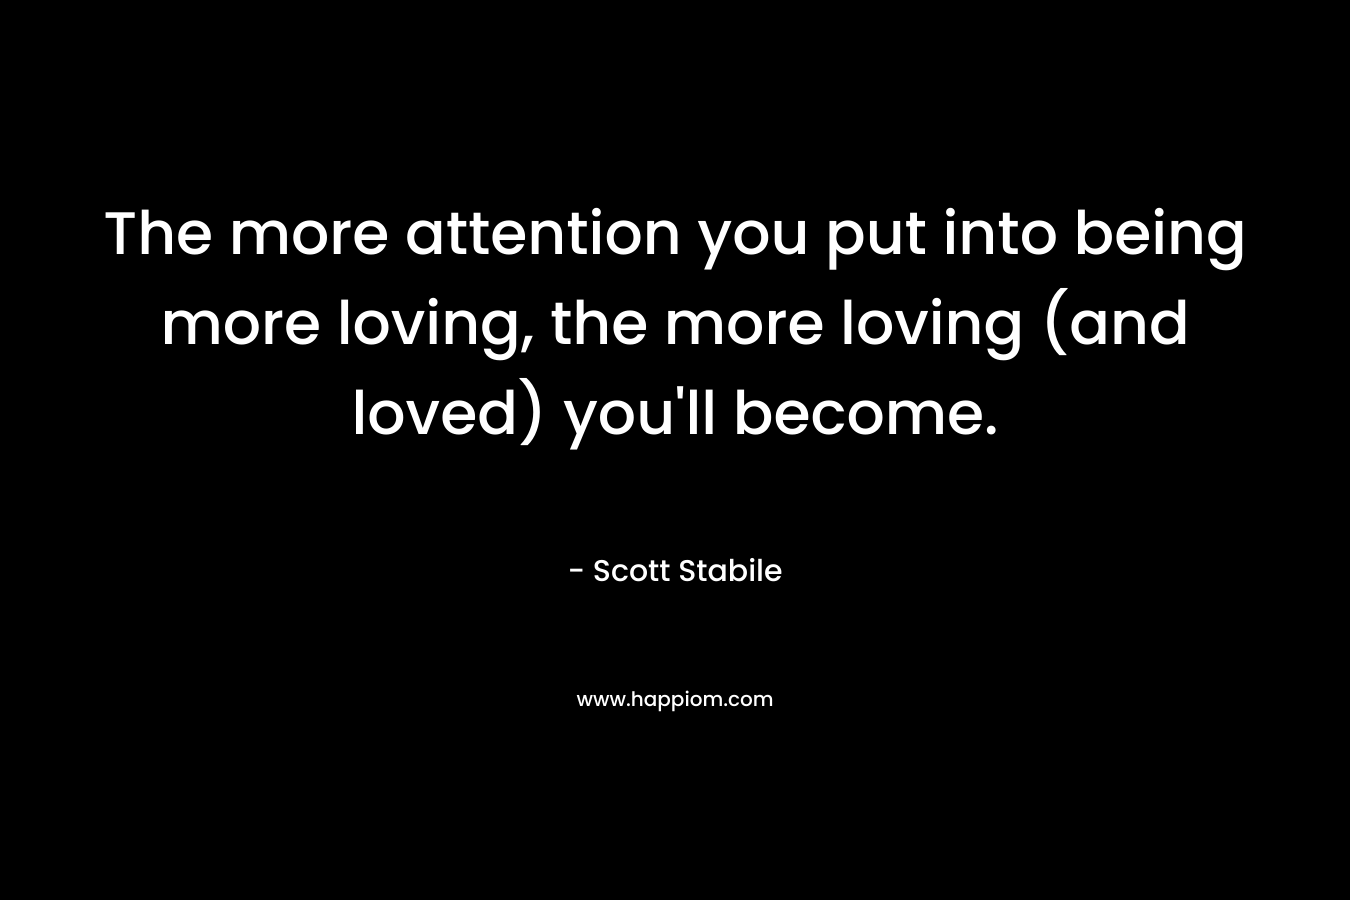 The more attention you put into being more loving, the more loving (and loved) you'll become.